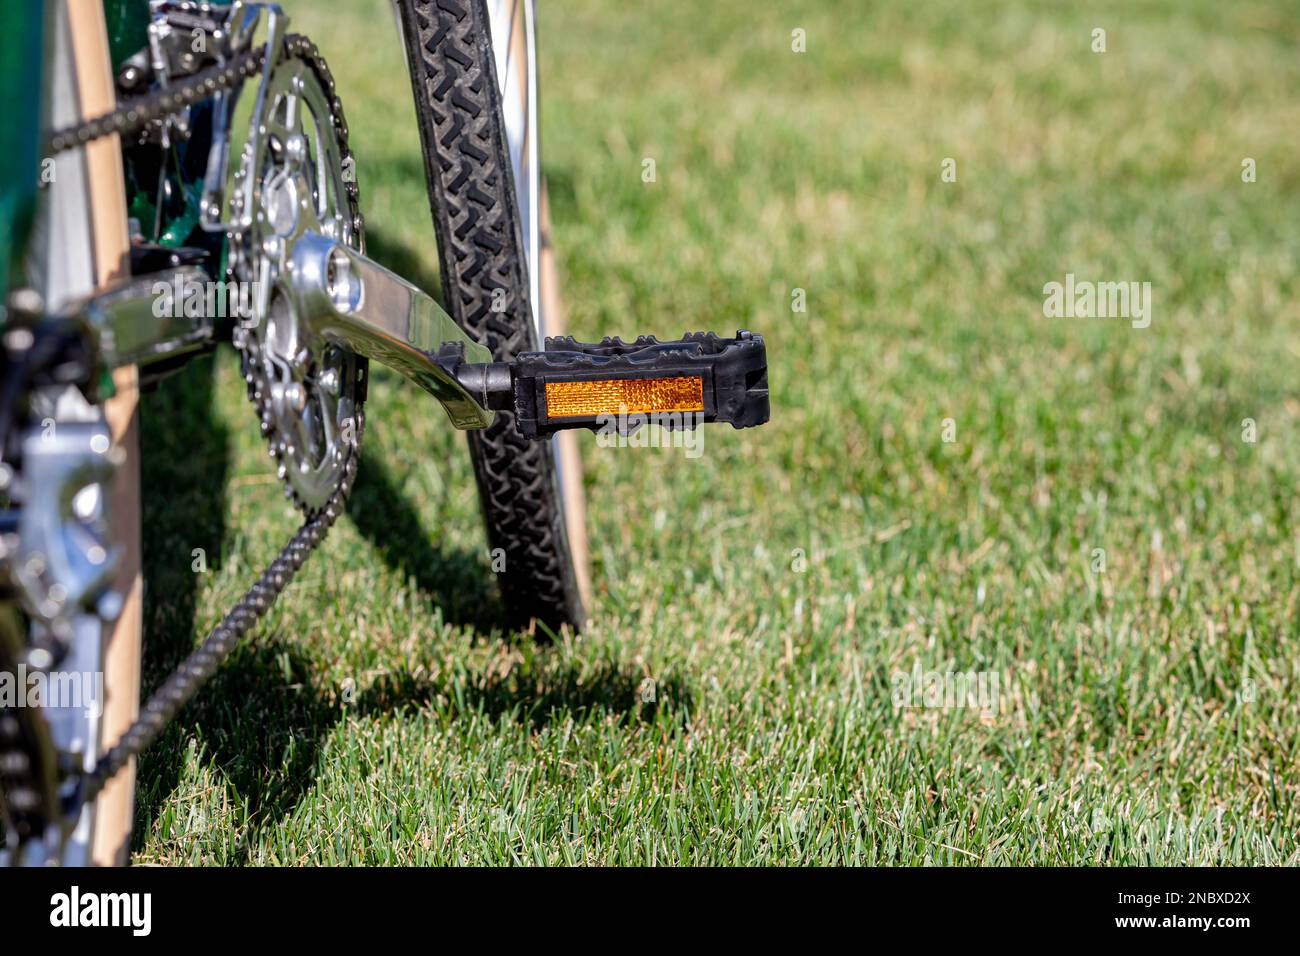 Bicycle with reflector pedal in grass during summer. Cycling, biking, and outdoor exercise concept. Stock Photo